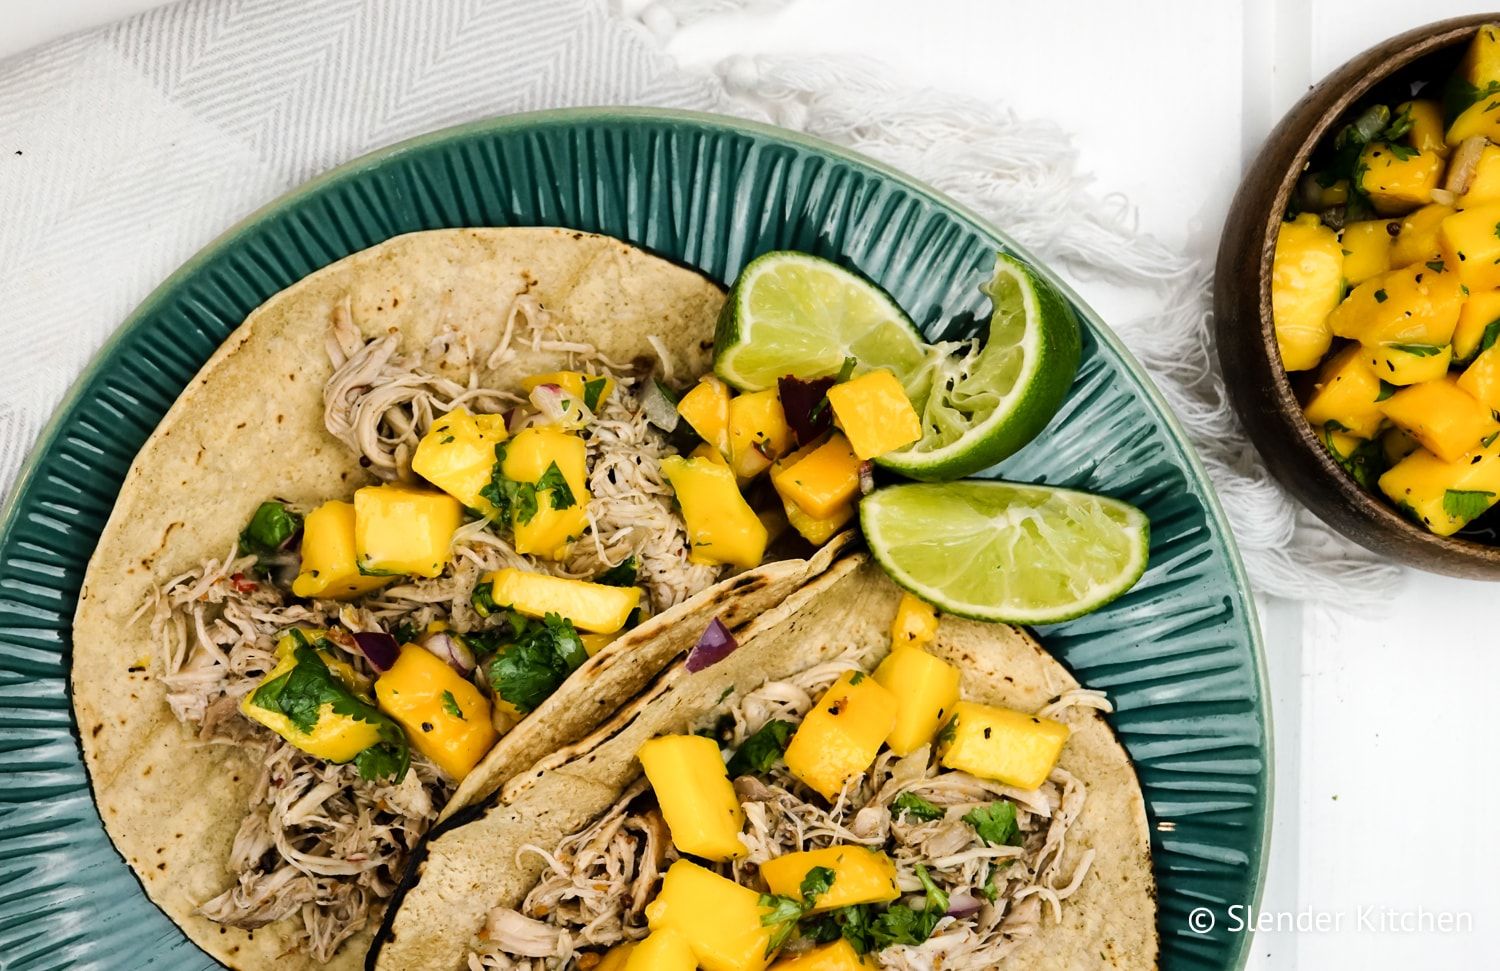 Slow cooker jerk chicken in a bowl with spices, lime juice, cilantro, and mango salsa.